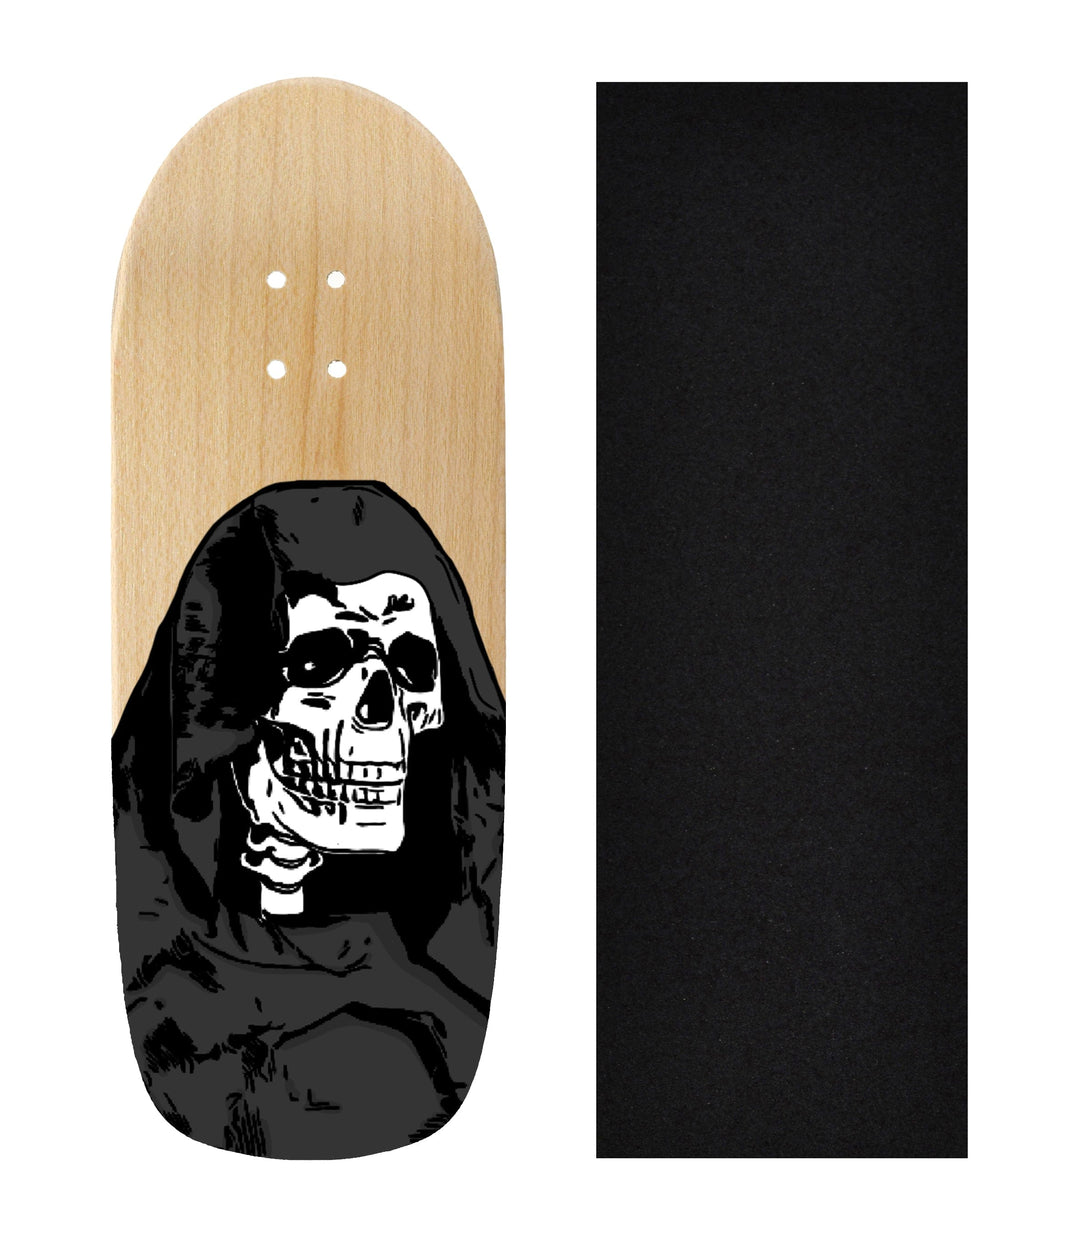 Teak Tuning Heat Transfer Graphic Wooden Fingerboard Deck, @boog._. - Entry# 86 Poolparty Deck